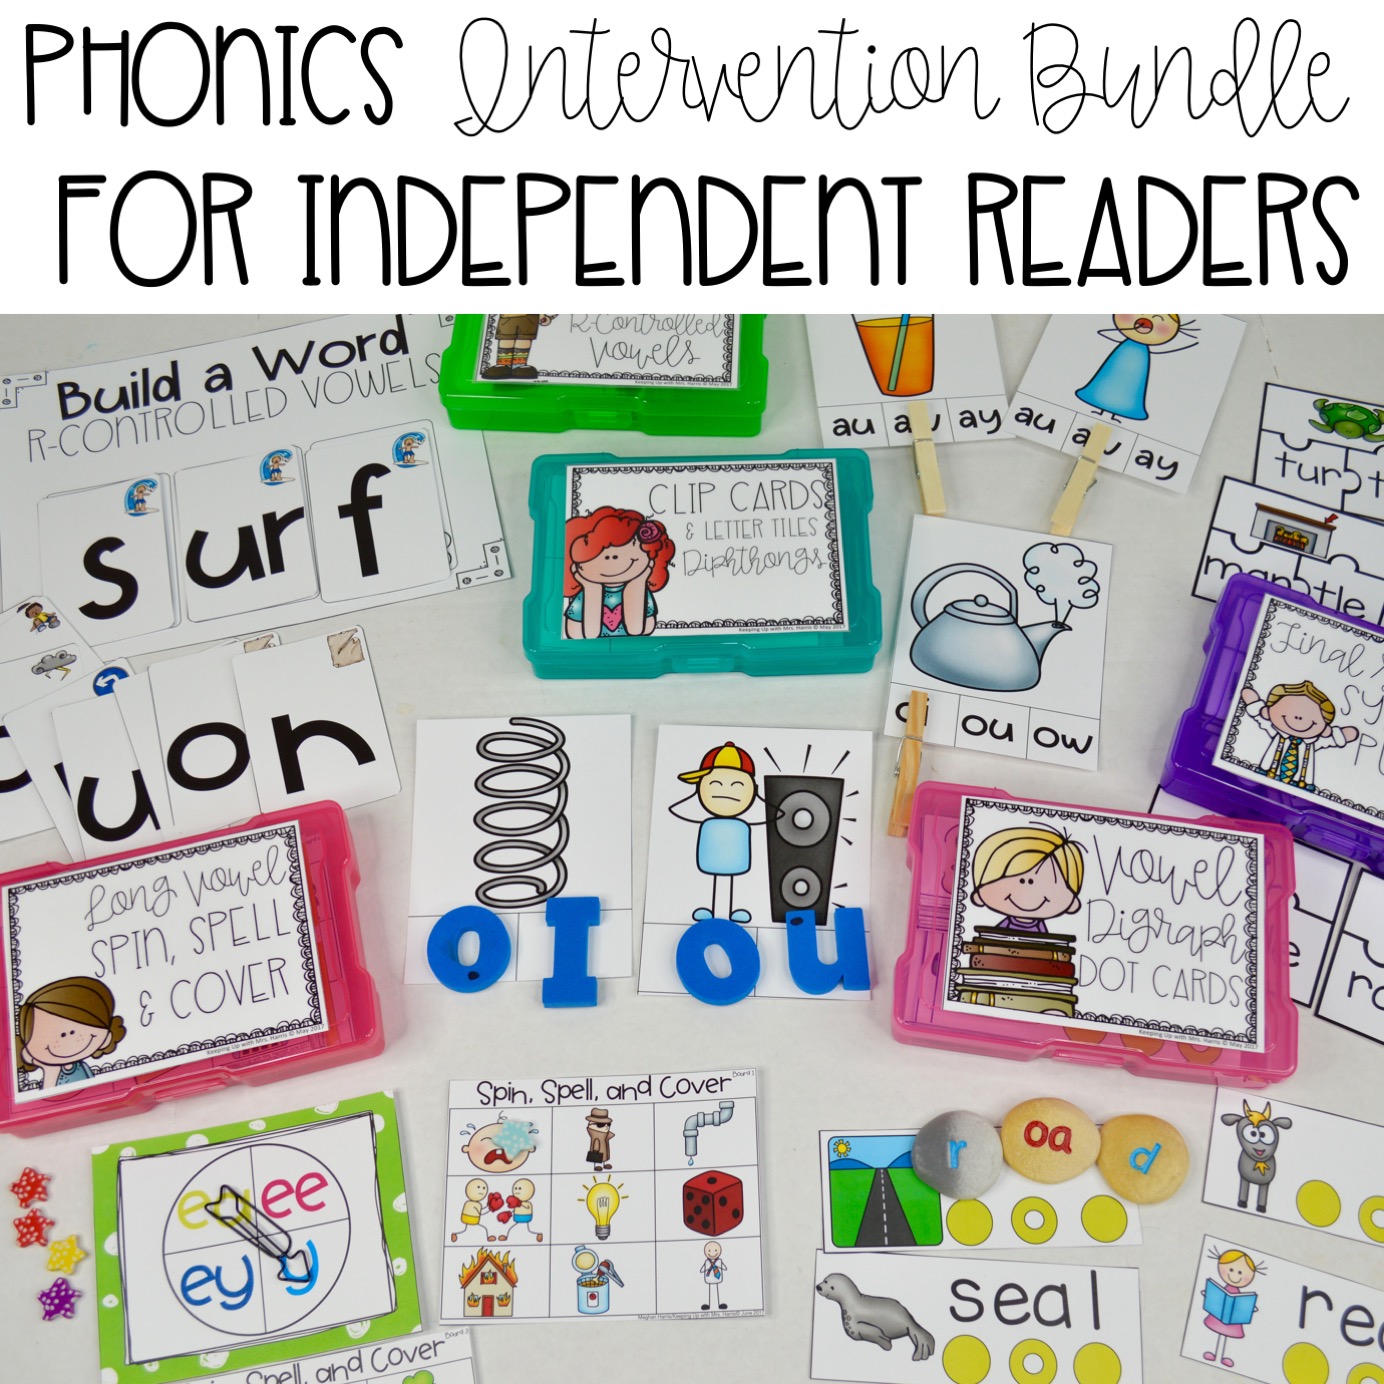 phonics - phonics games - phonics activities - phonics lessons